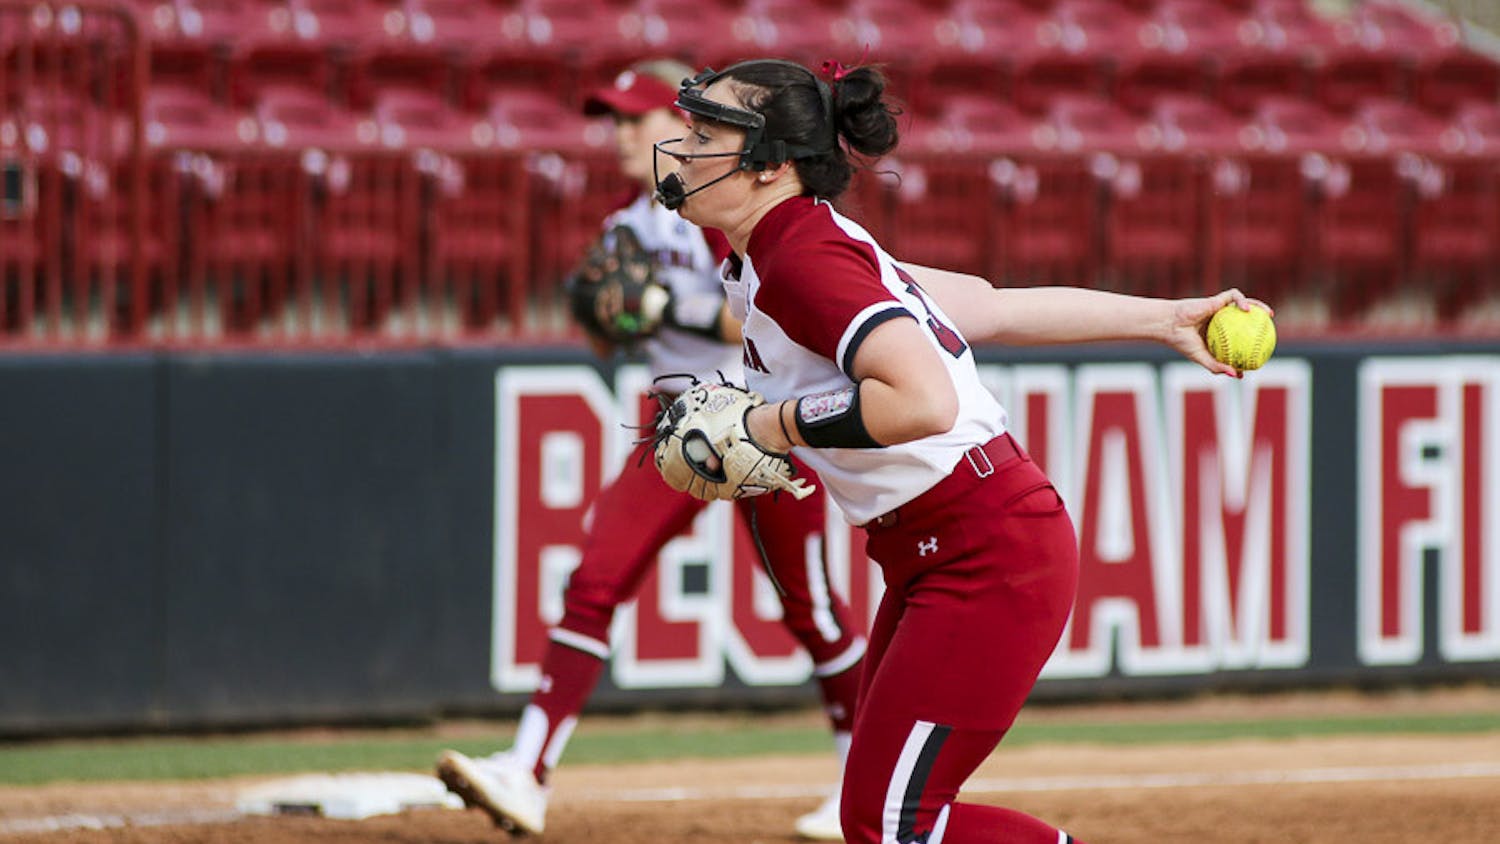 Senior pitcher Karsen Ochs winds up for a pitch during the match against Western Kentucky University at Beckham Field on Feb. 19, 2023. The Gamecocks beat the Hilltoppers 11-2.